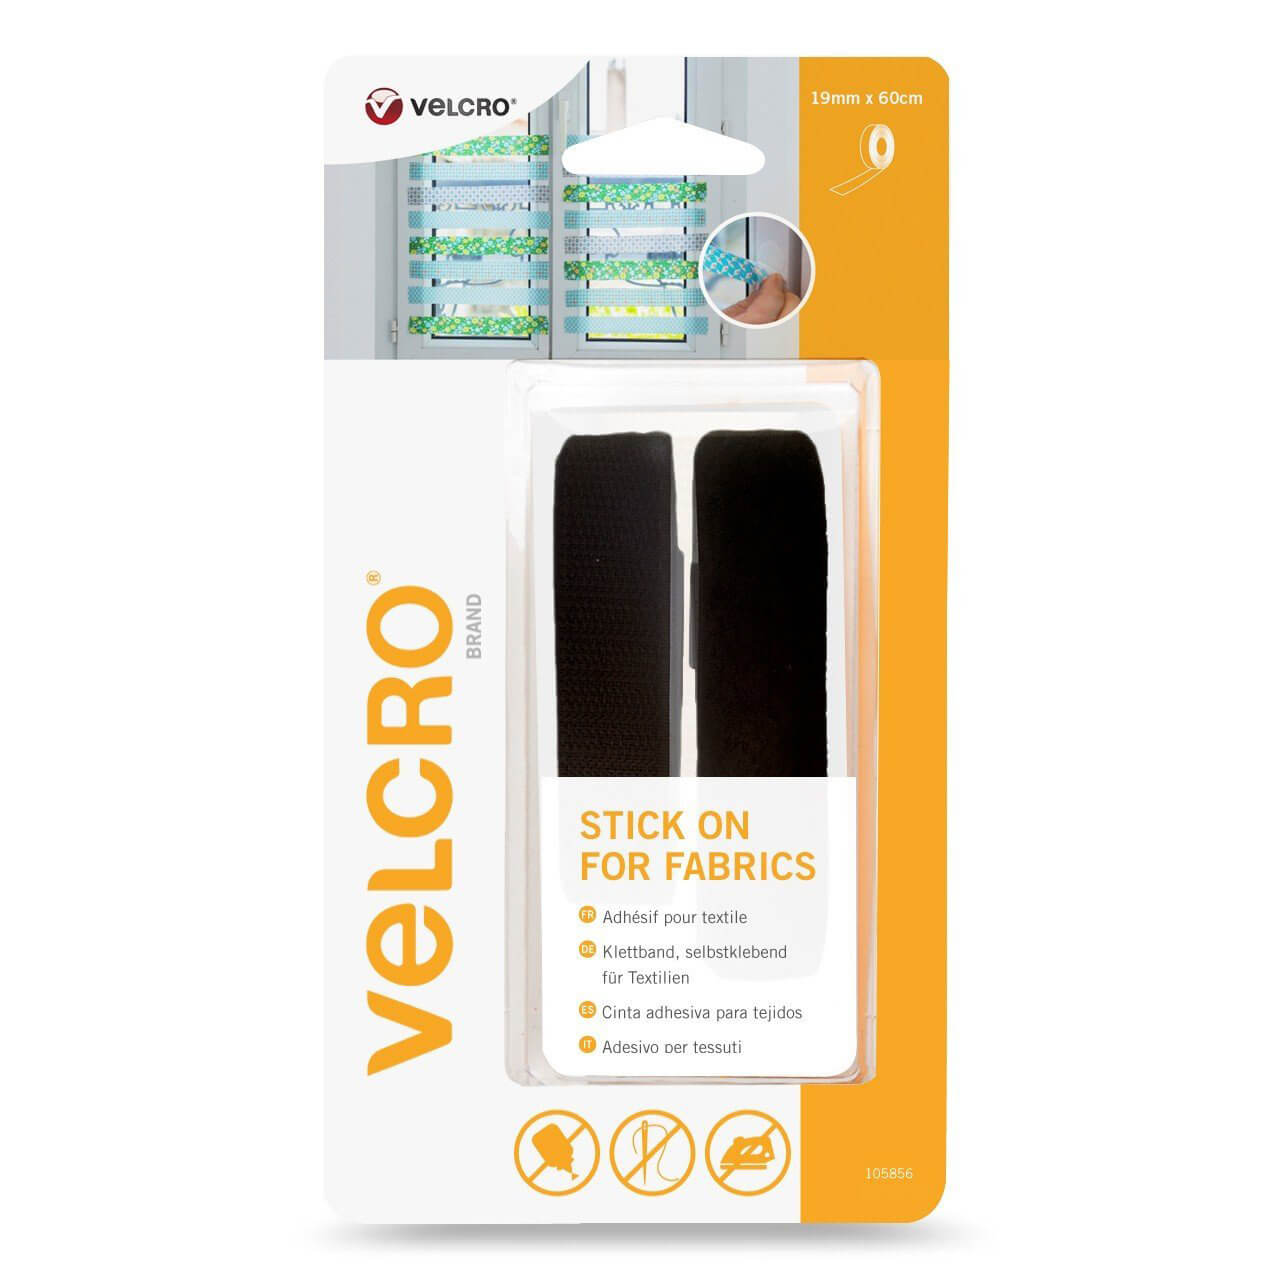  Iron On Velcro For Fabric